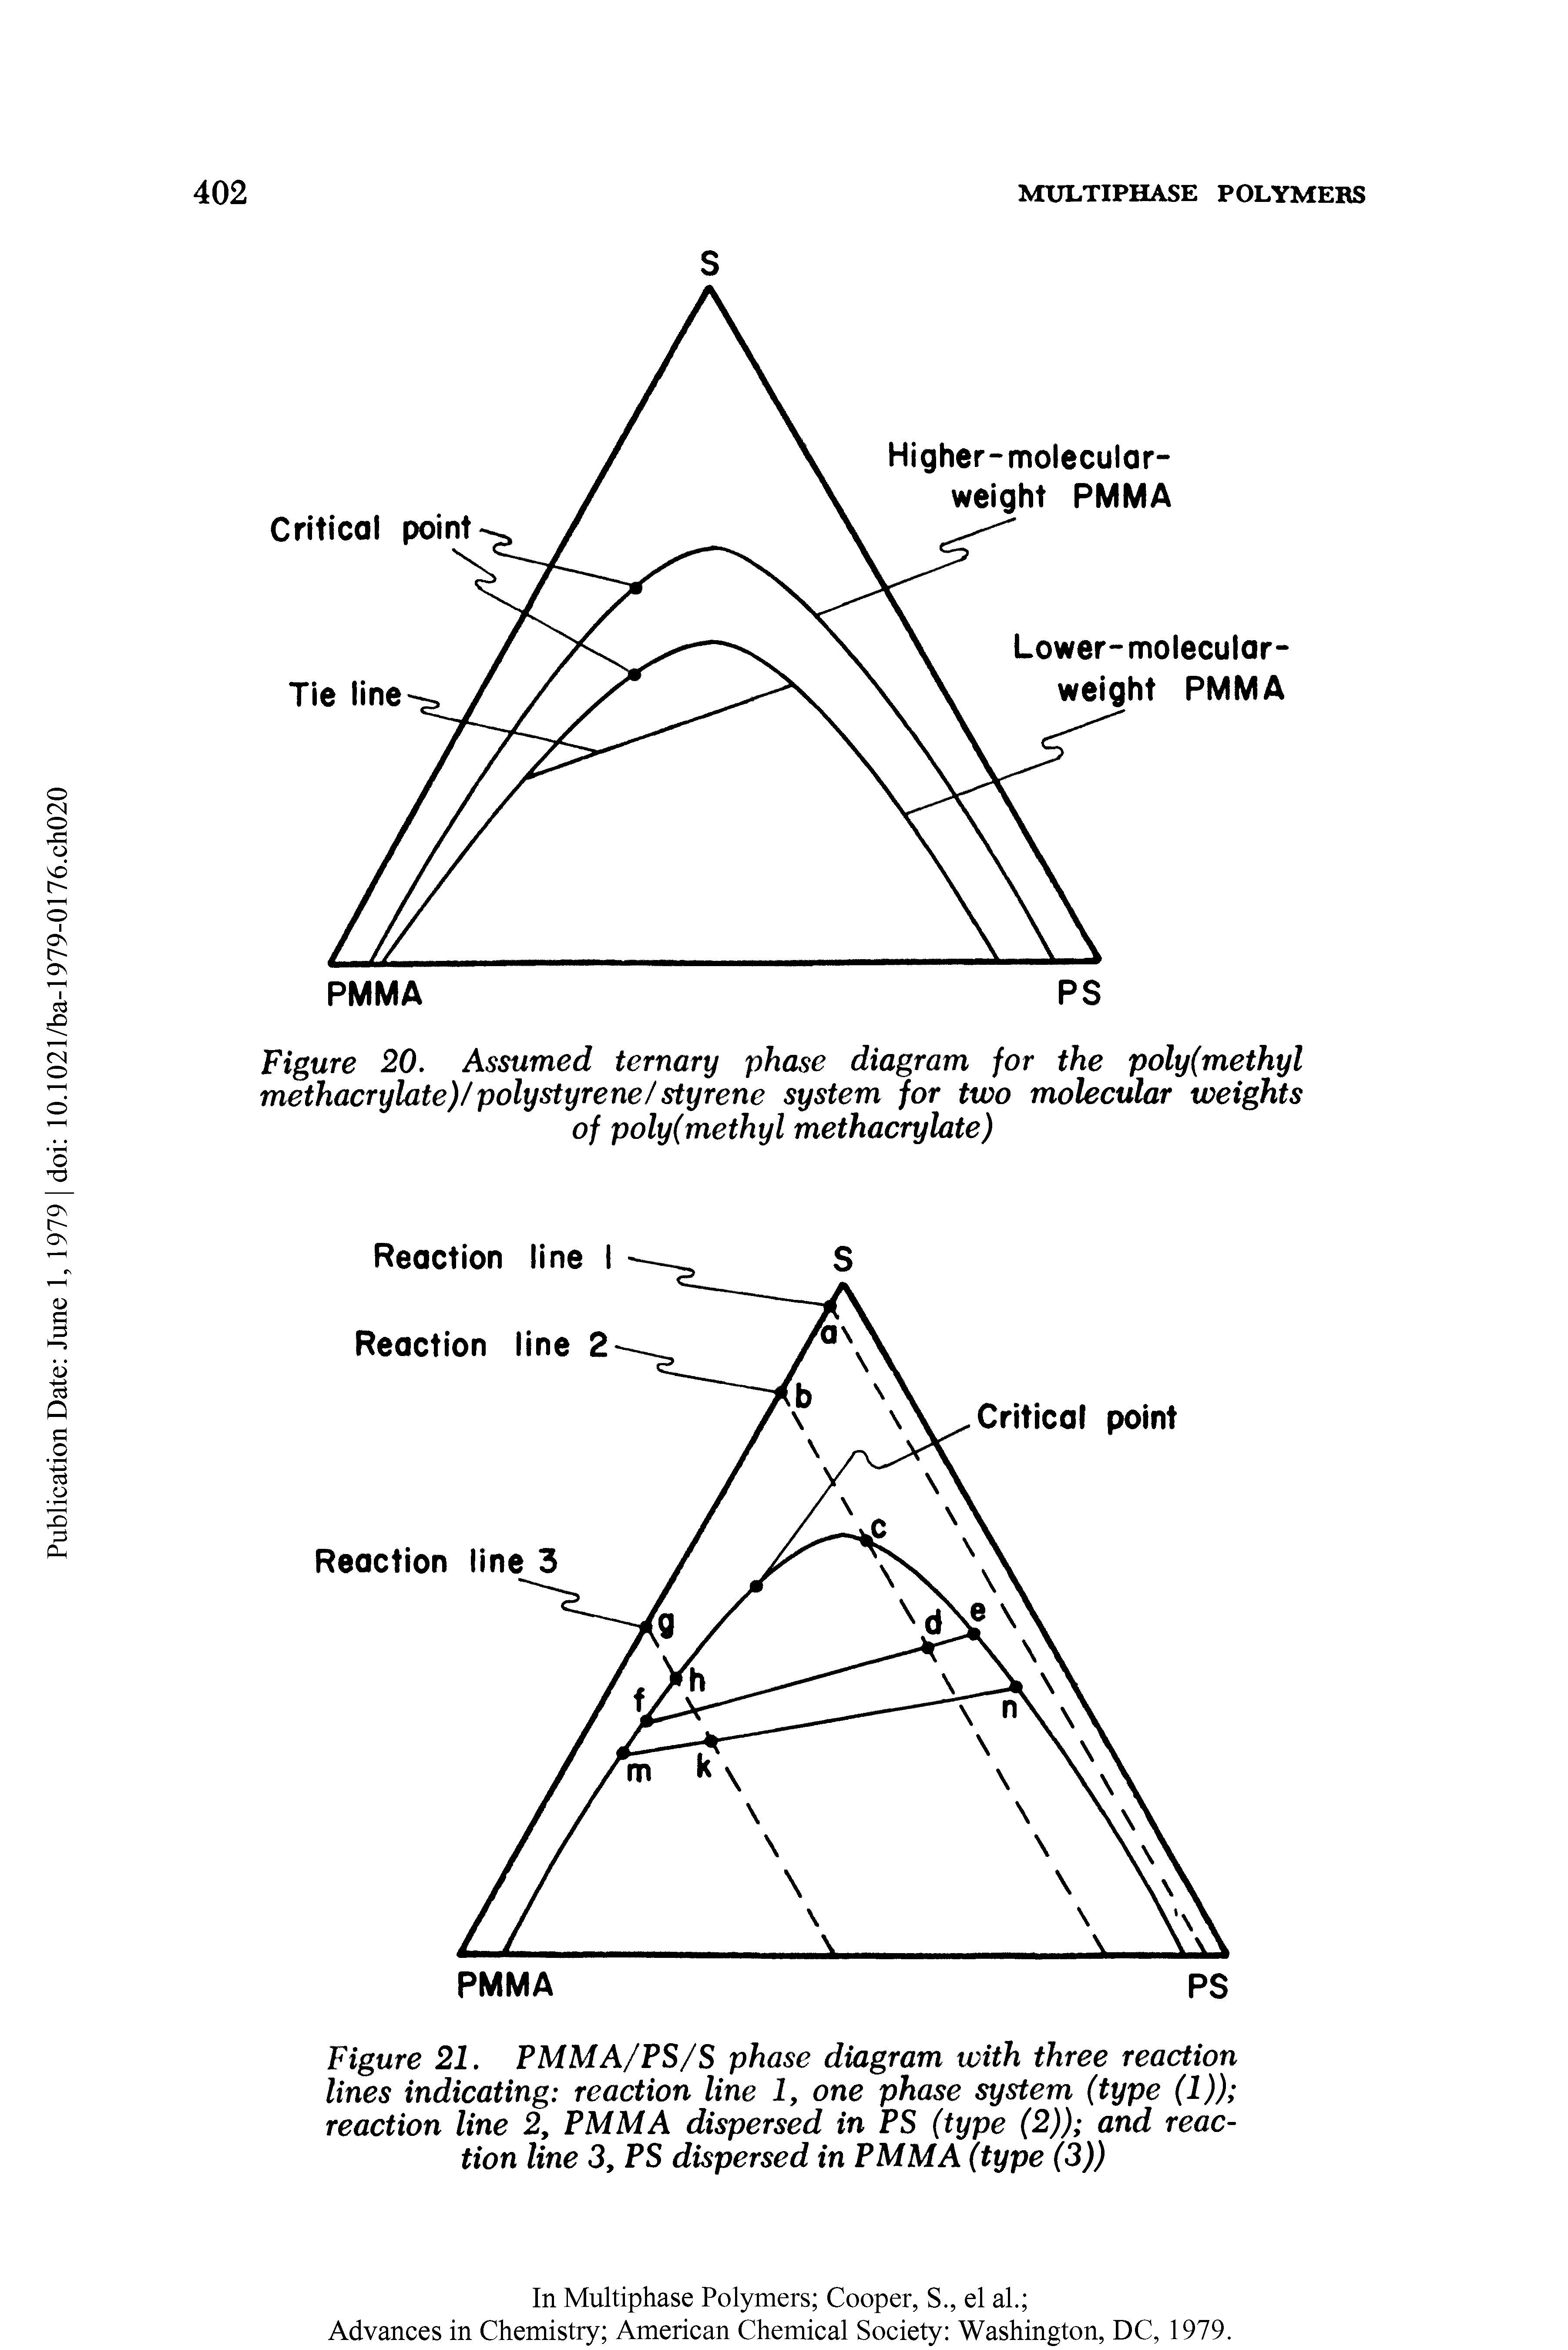 Figure 20. Assumed ternary phase diagram for the poly(methyl methacrylate)/polystyrene/styrene system for two molecular weights of poly(methyl methacrylate)...